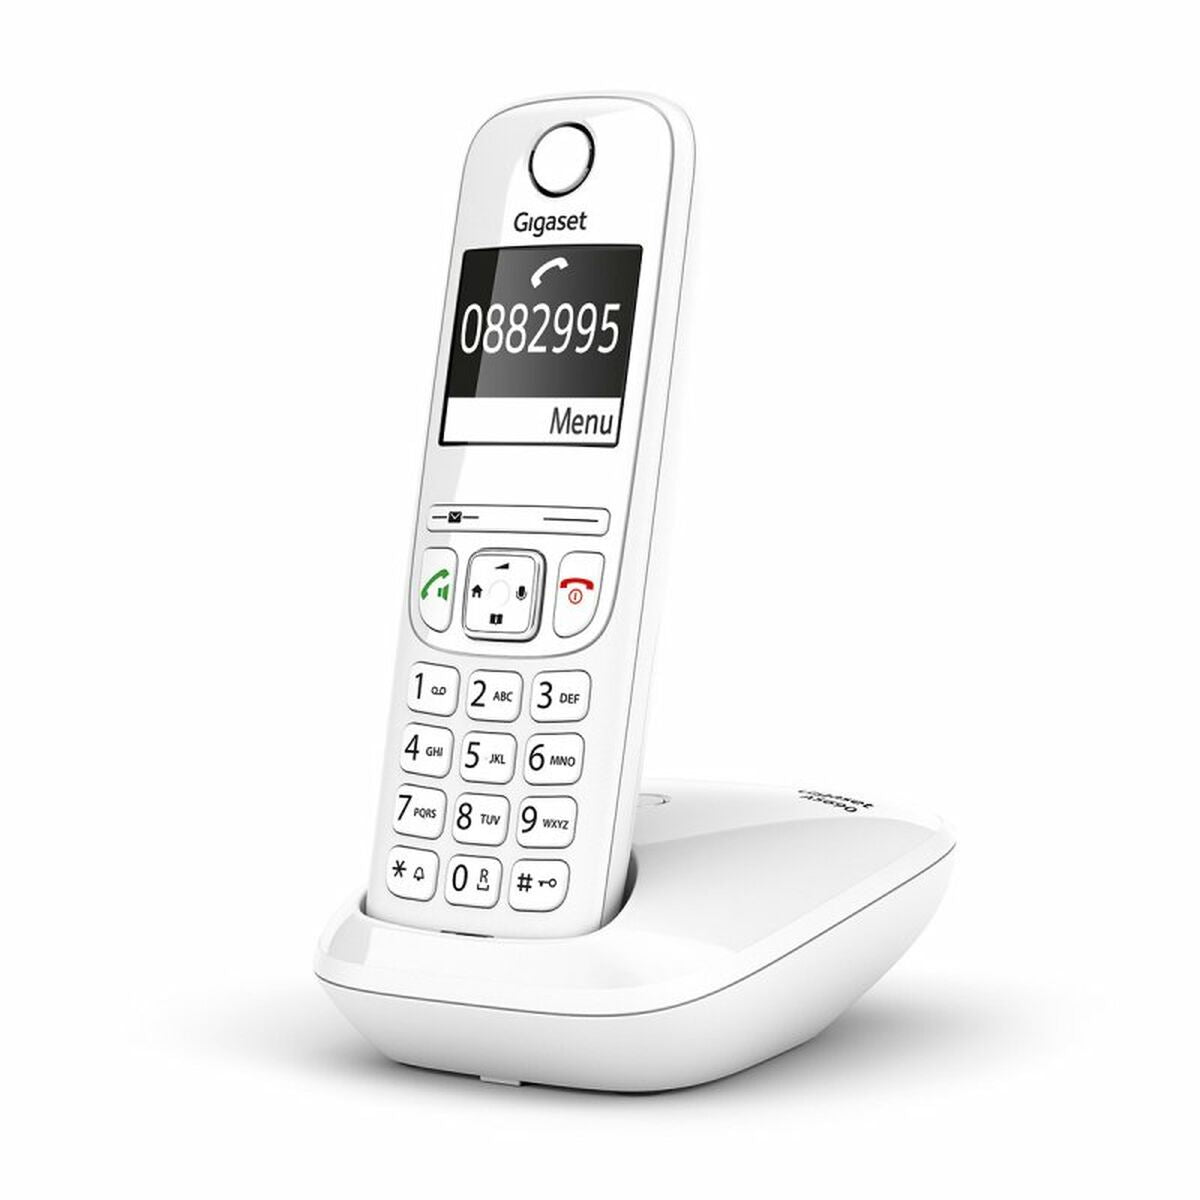 Wireless Phone Gigaset AS690 White, Gigaset, Electronics, Landline telephones and accessories, wireless-phone-gigaset-as690-white, Brand_Gigaset, category-reference-2609, category-reference-2617, category-reference-2619, category-reference-t-18372, category-reference-t-19653, Condition_NEW, office, Price_50 - 100, telephones & tablets, Teleworking, RiotNook